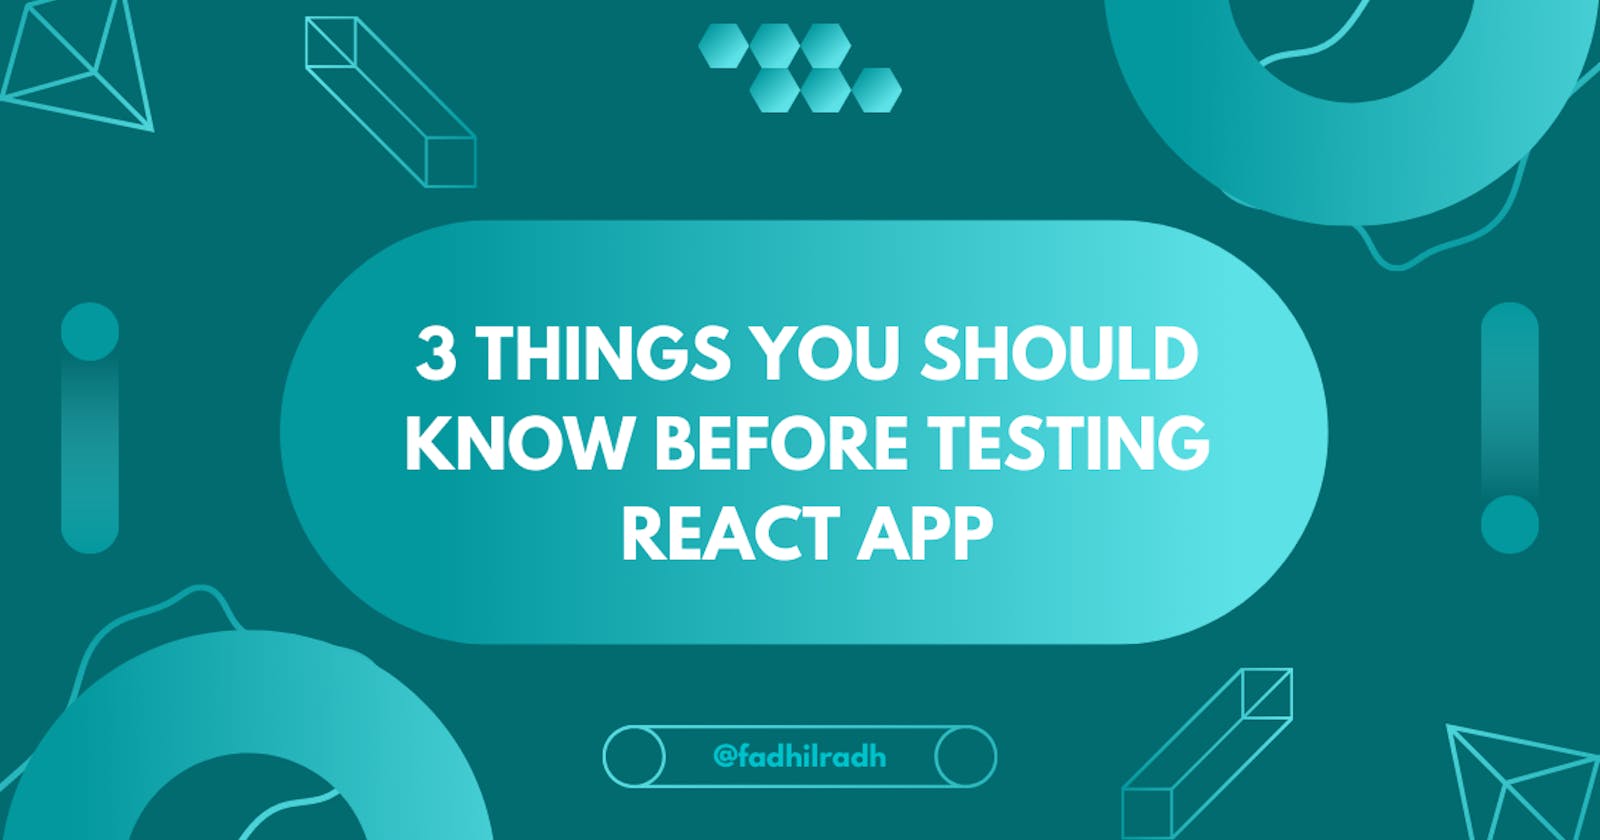 3 Things You Should Know Before Testing React App